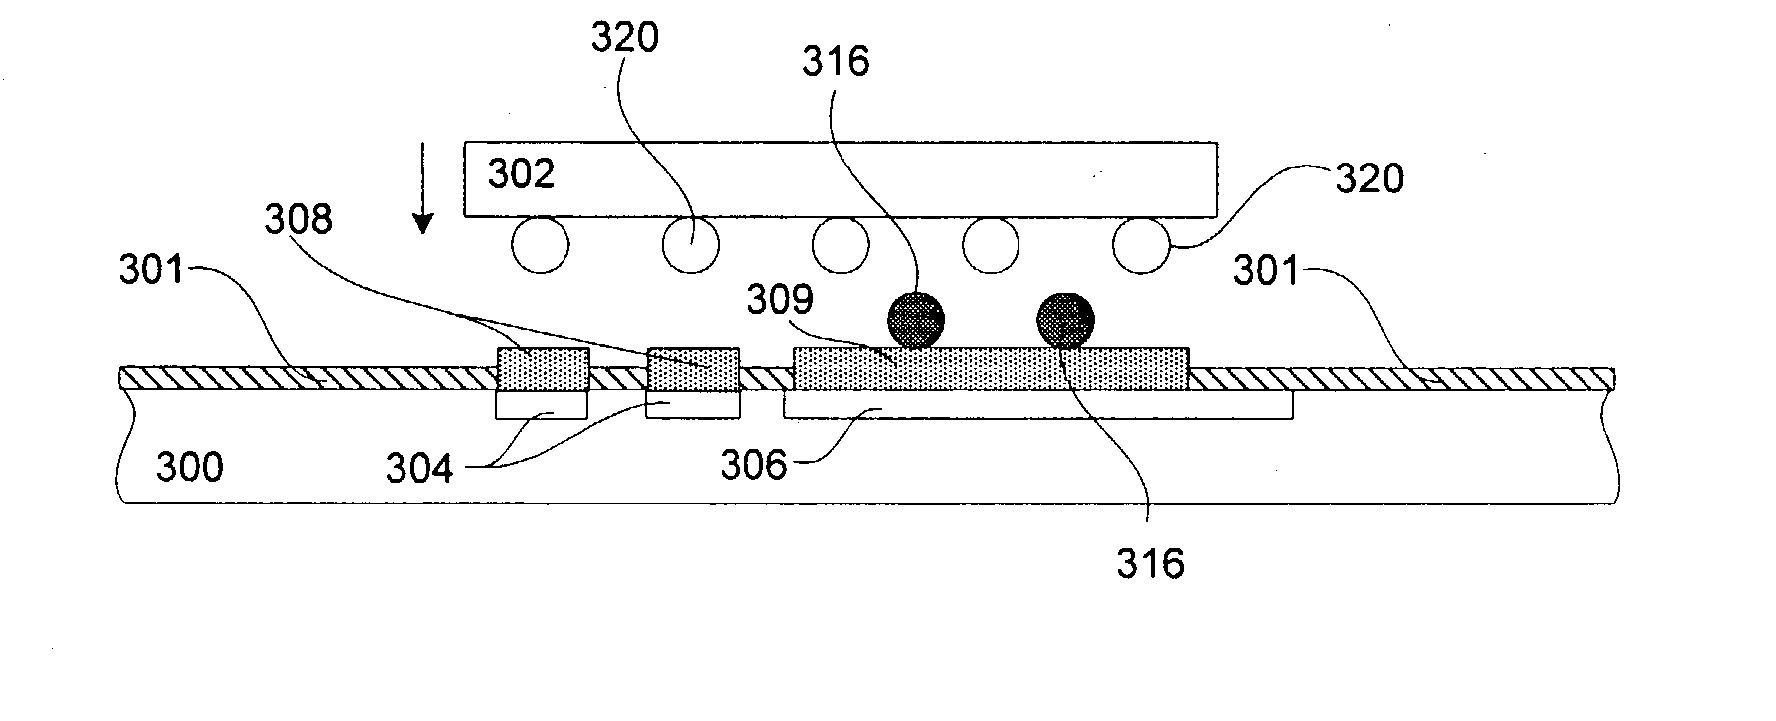 Method for improved high current component interconnections